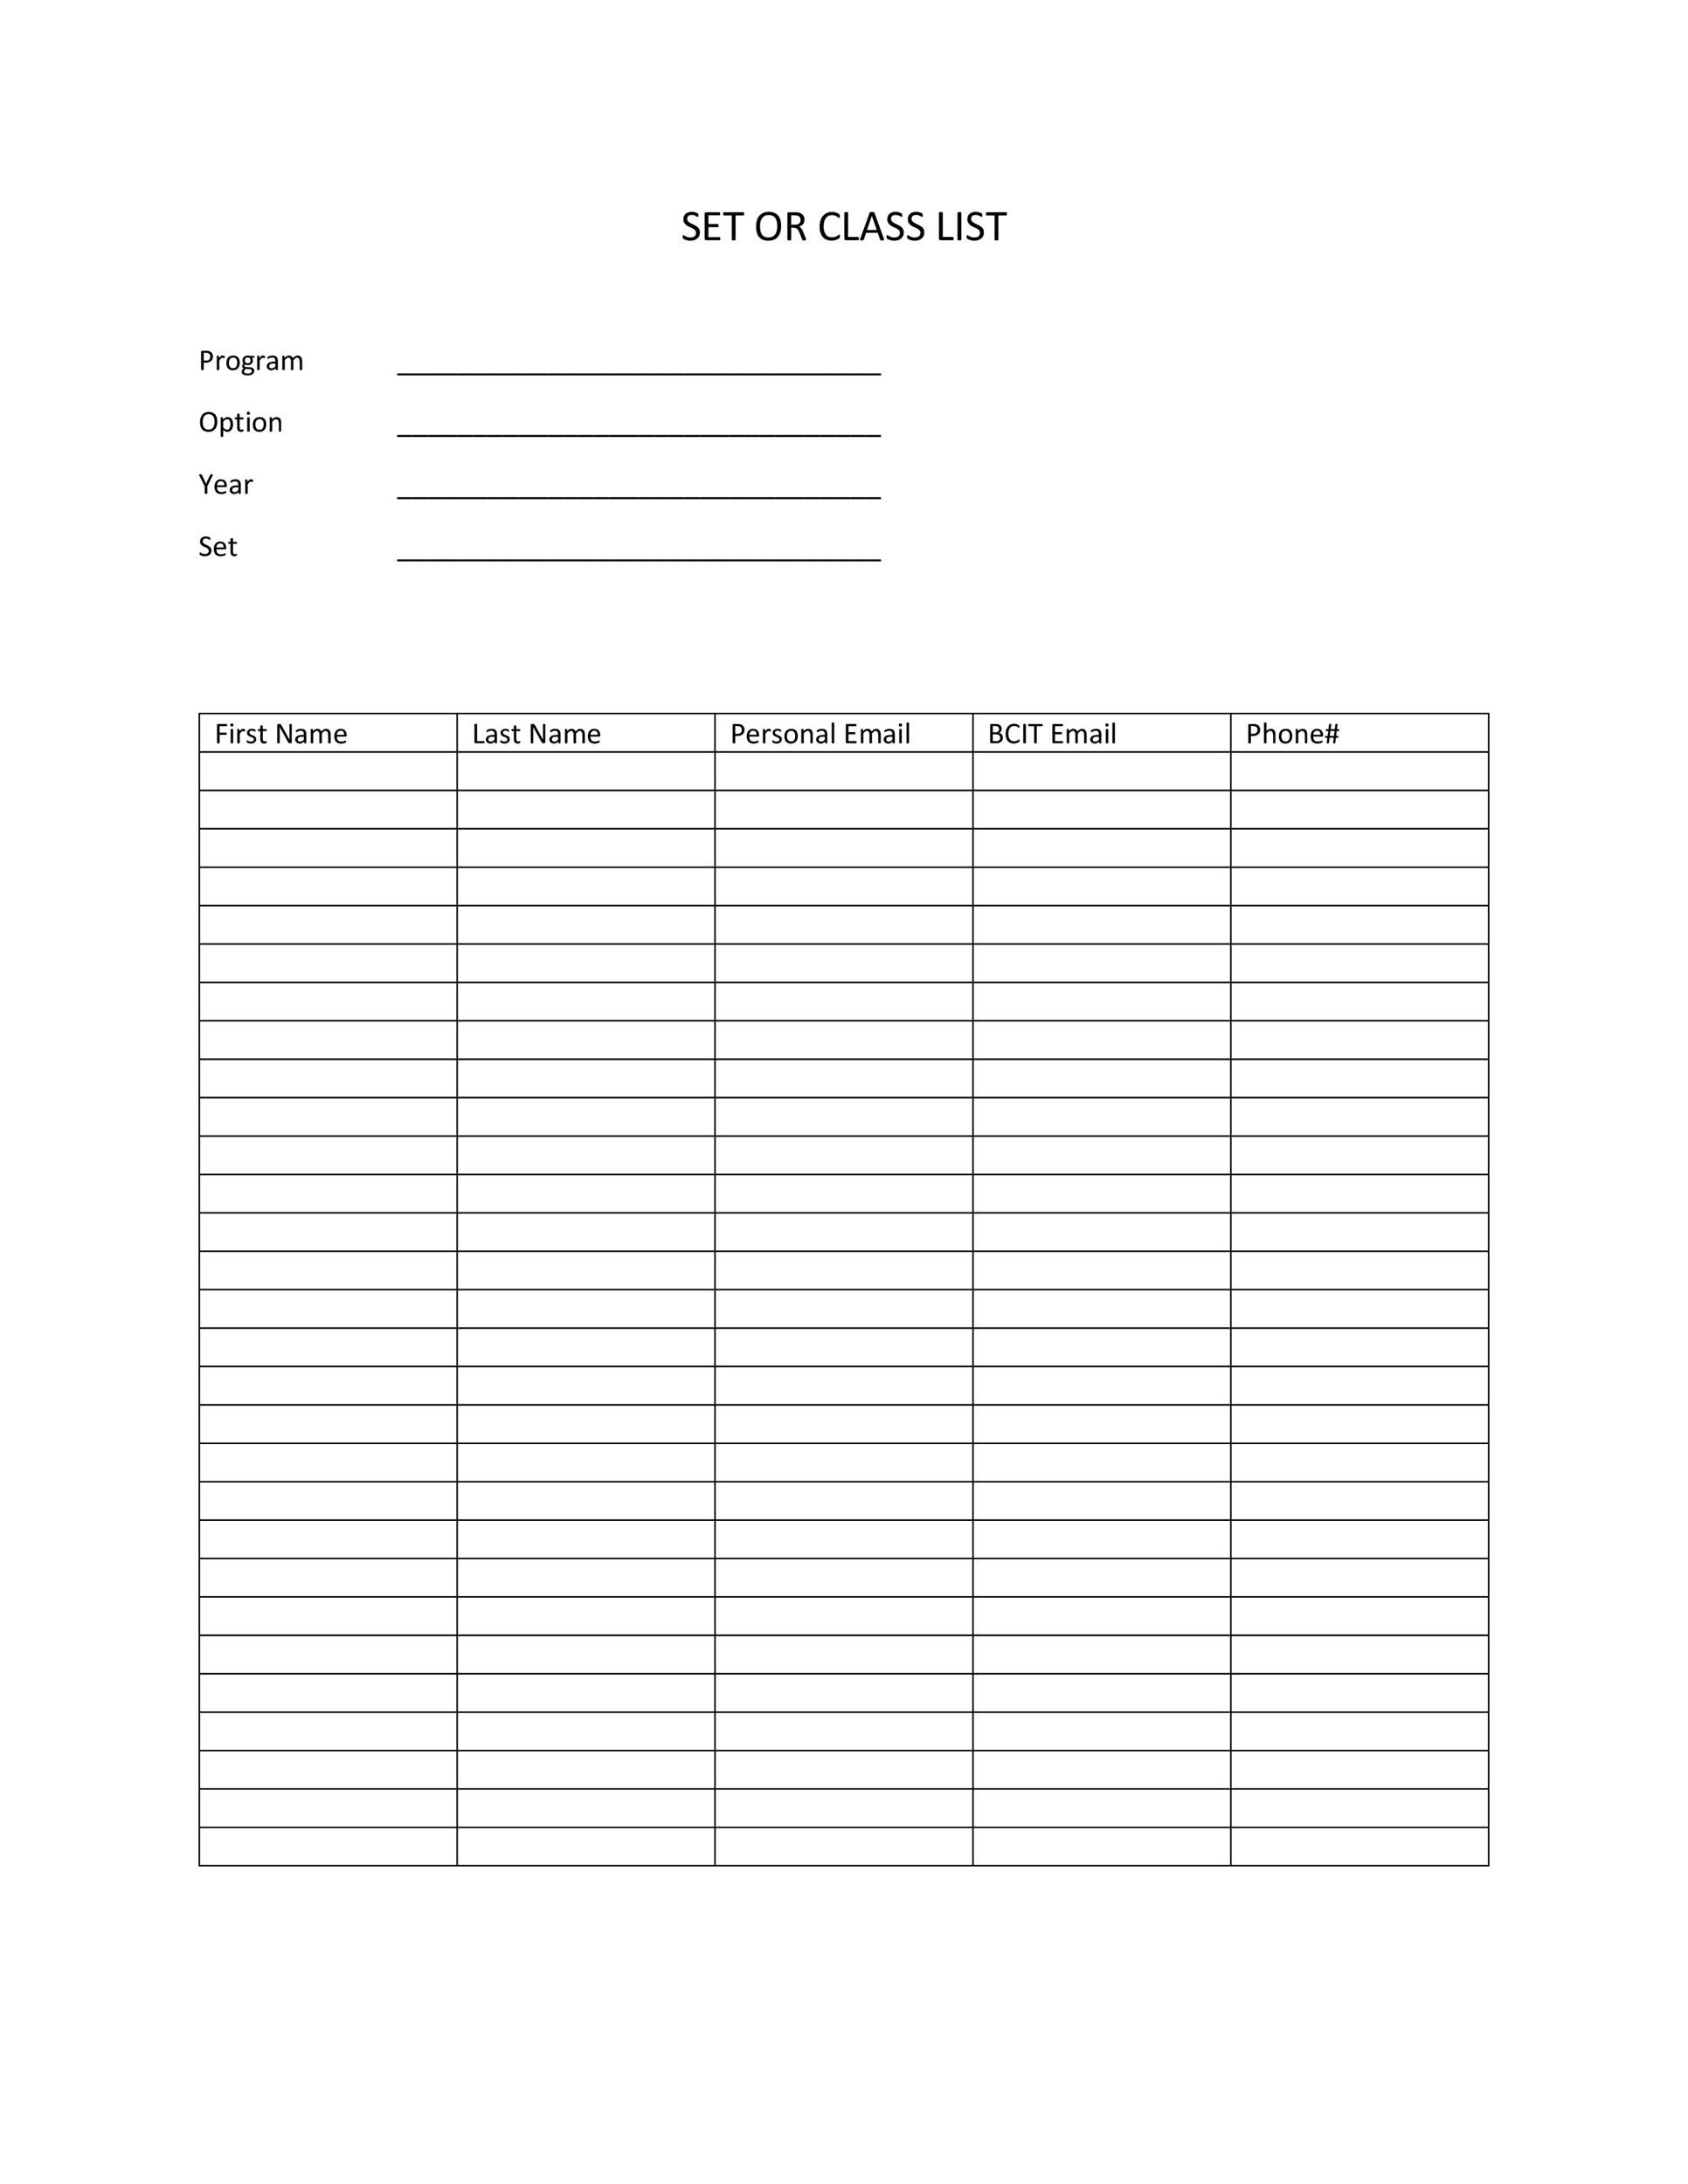 37 Class Roster Templates Student Roster Templates For Teachers